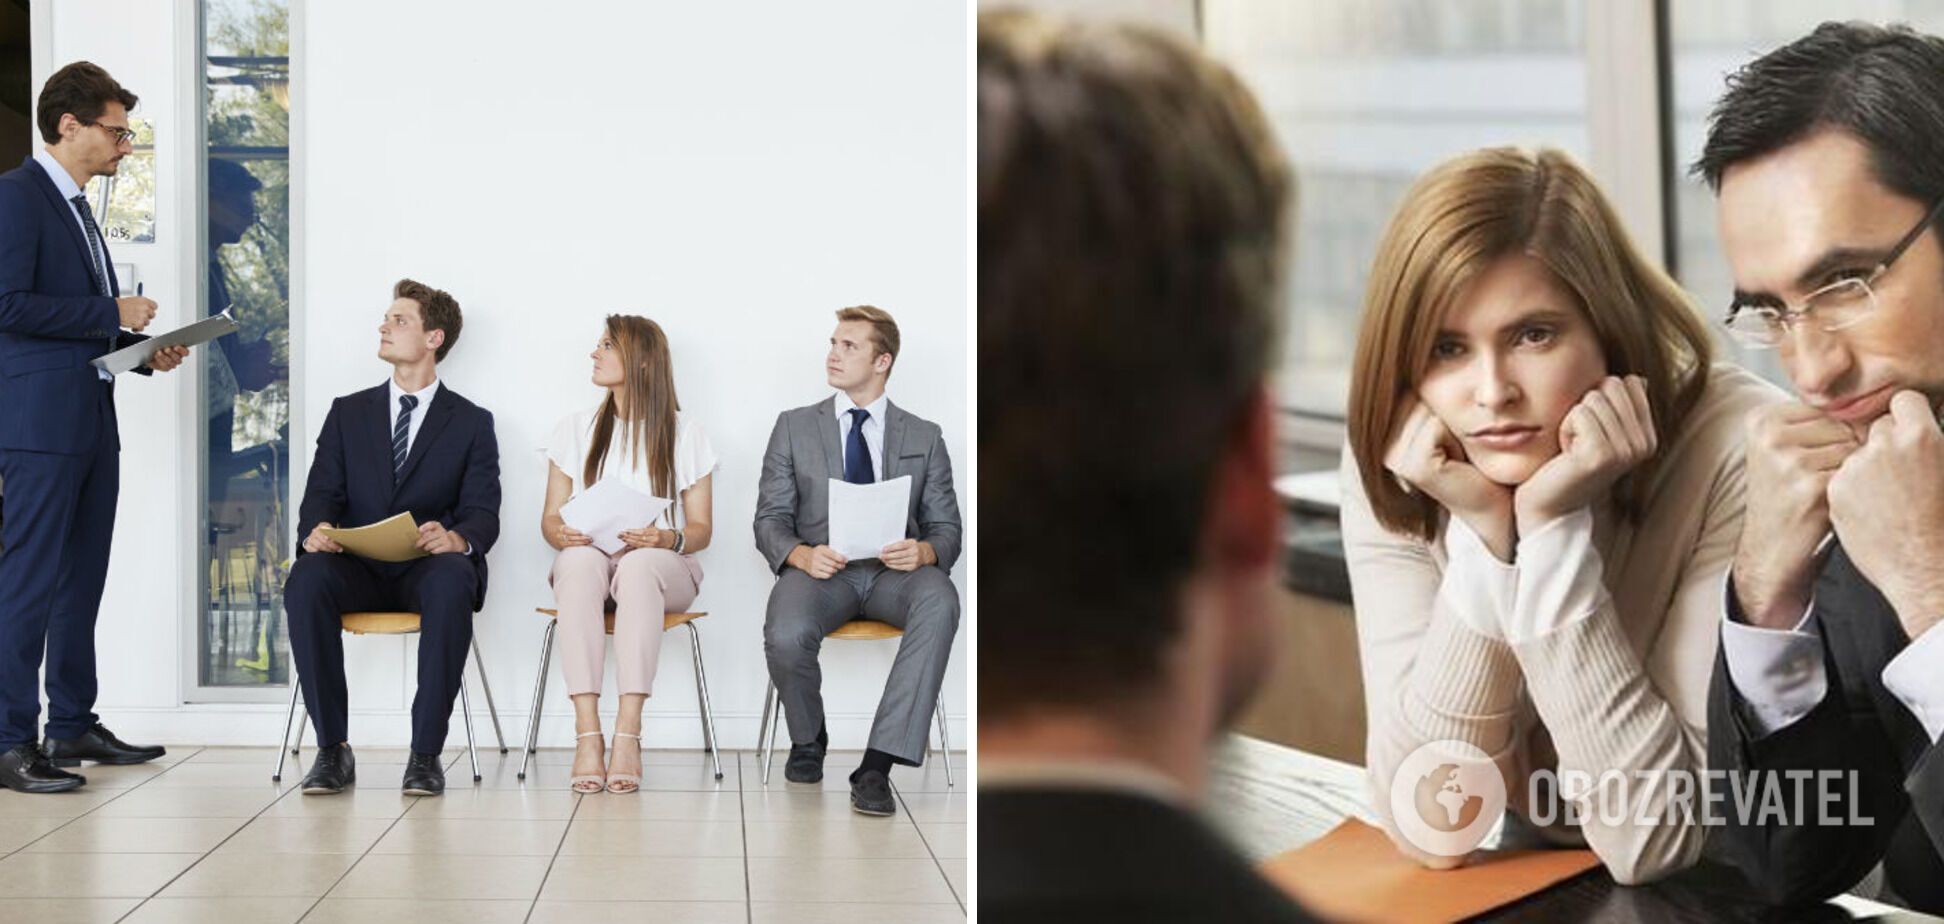 What you should never say during a job interview: 10 forbidden phrases